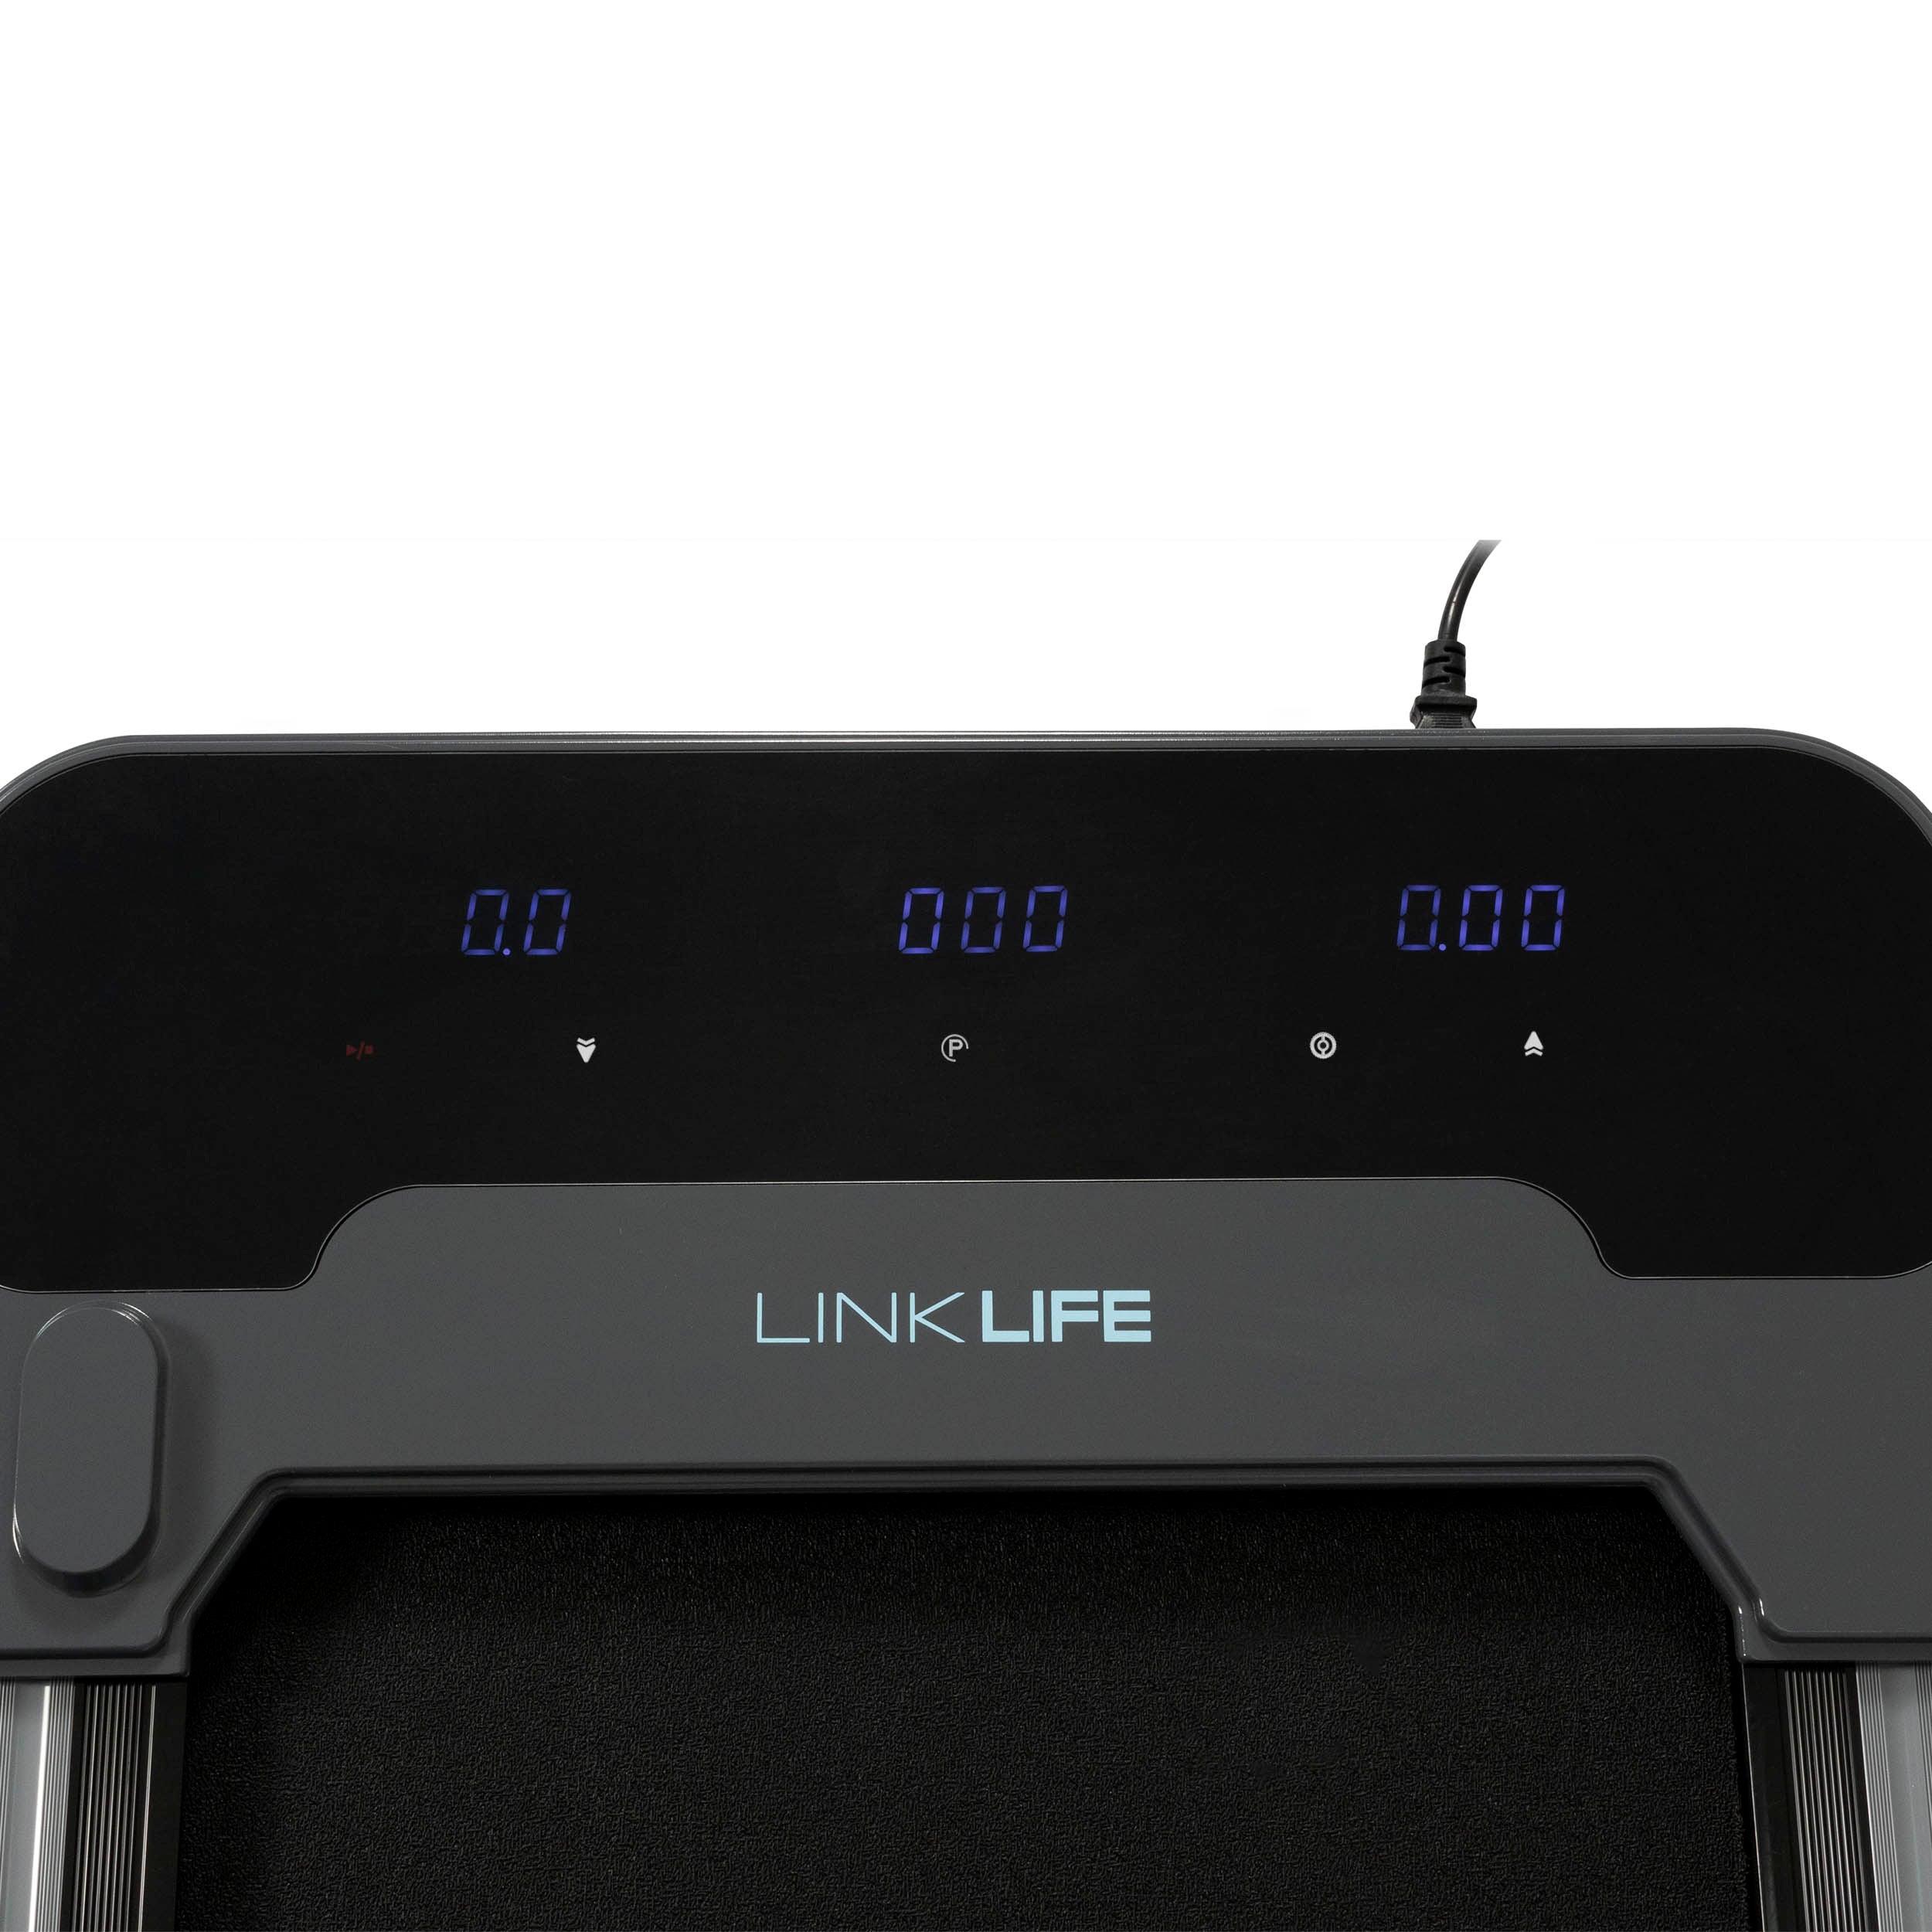 An image of the top LED panel that shows your workout status.